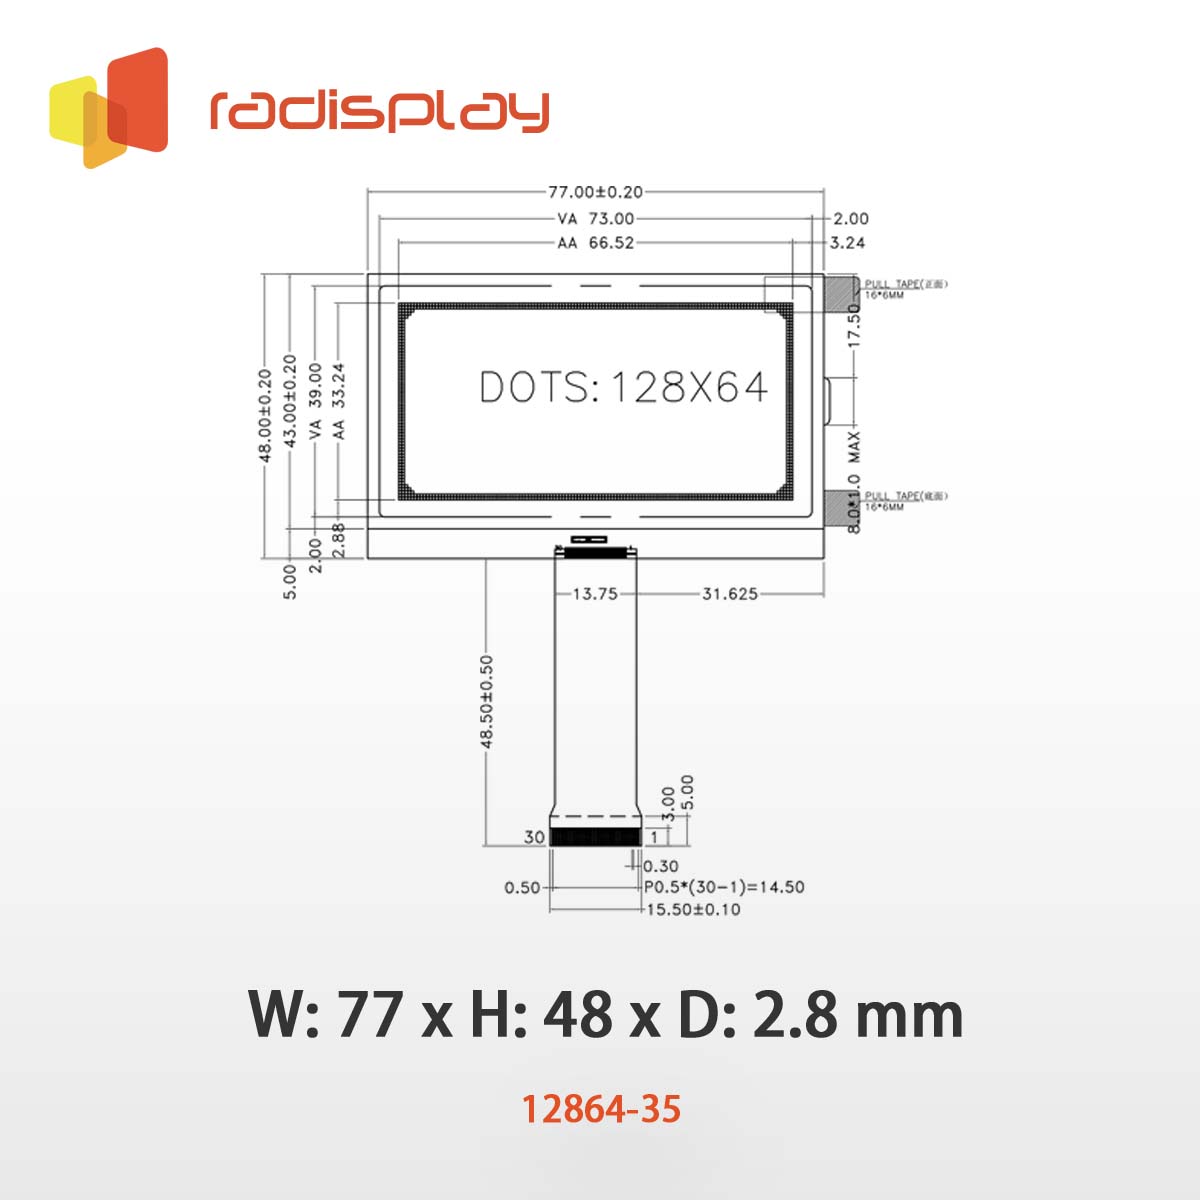 128x64 Graphic LCD (Chip on Glass) (RC12864-35)